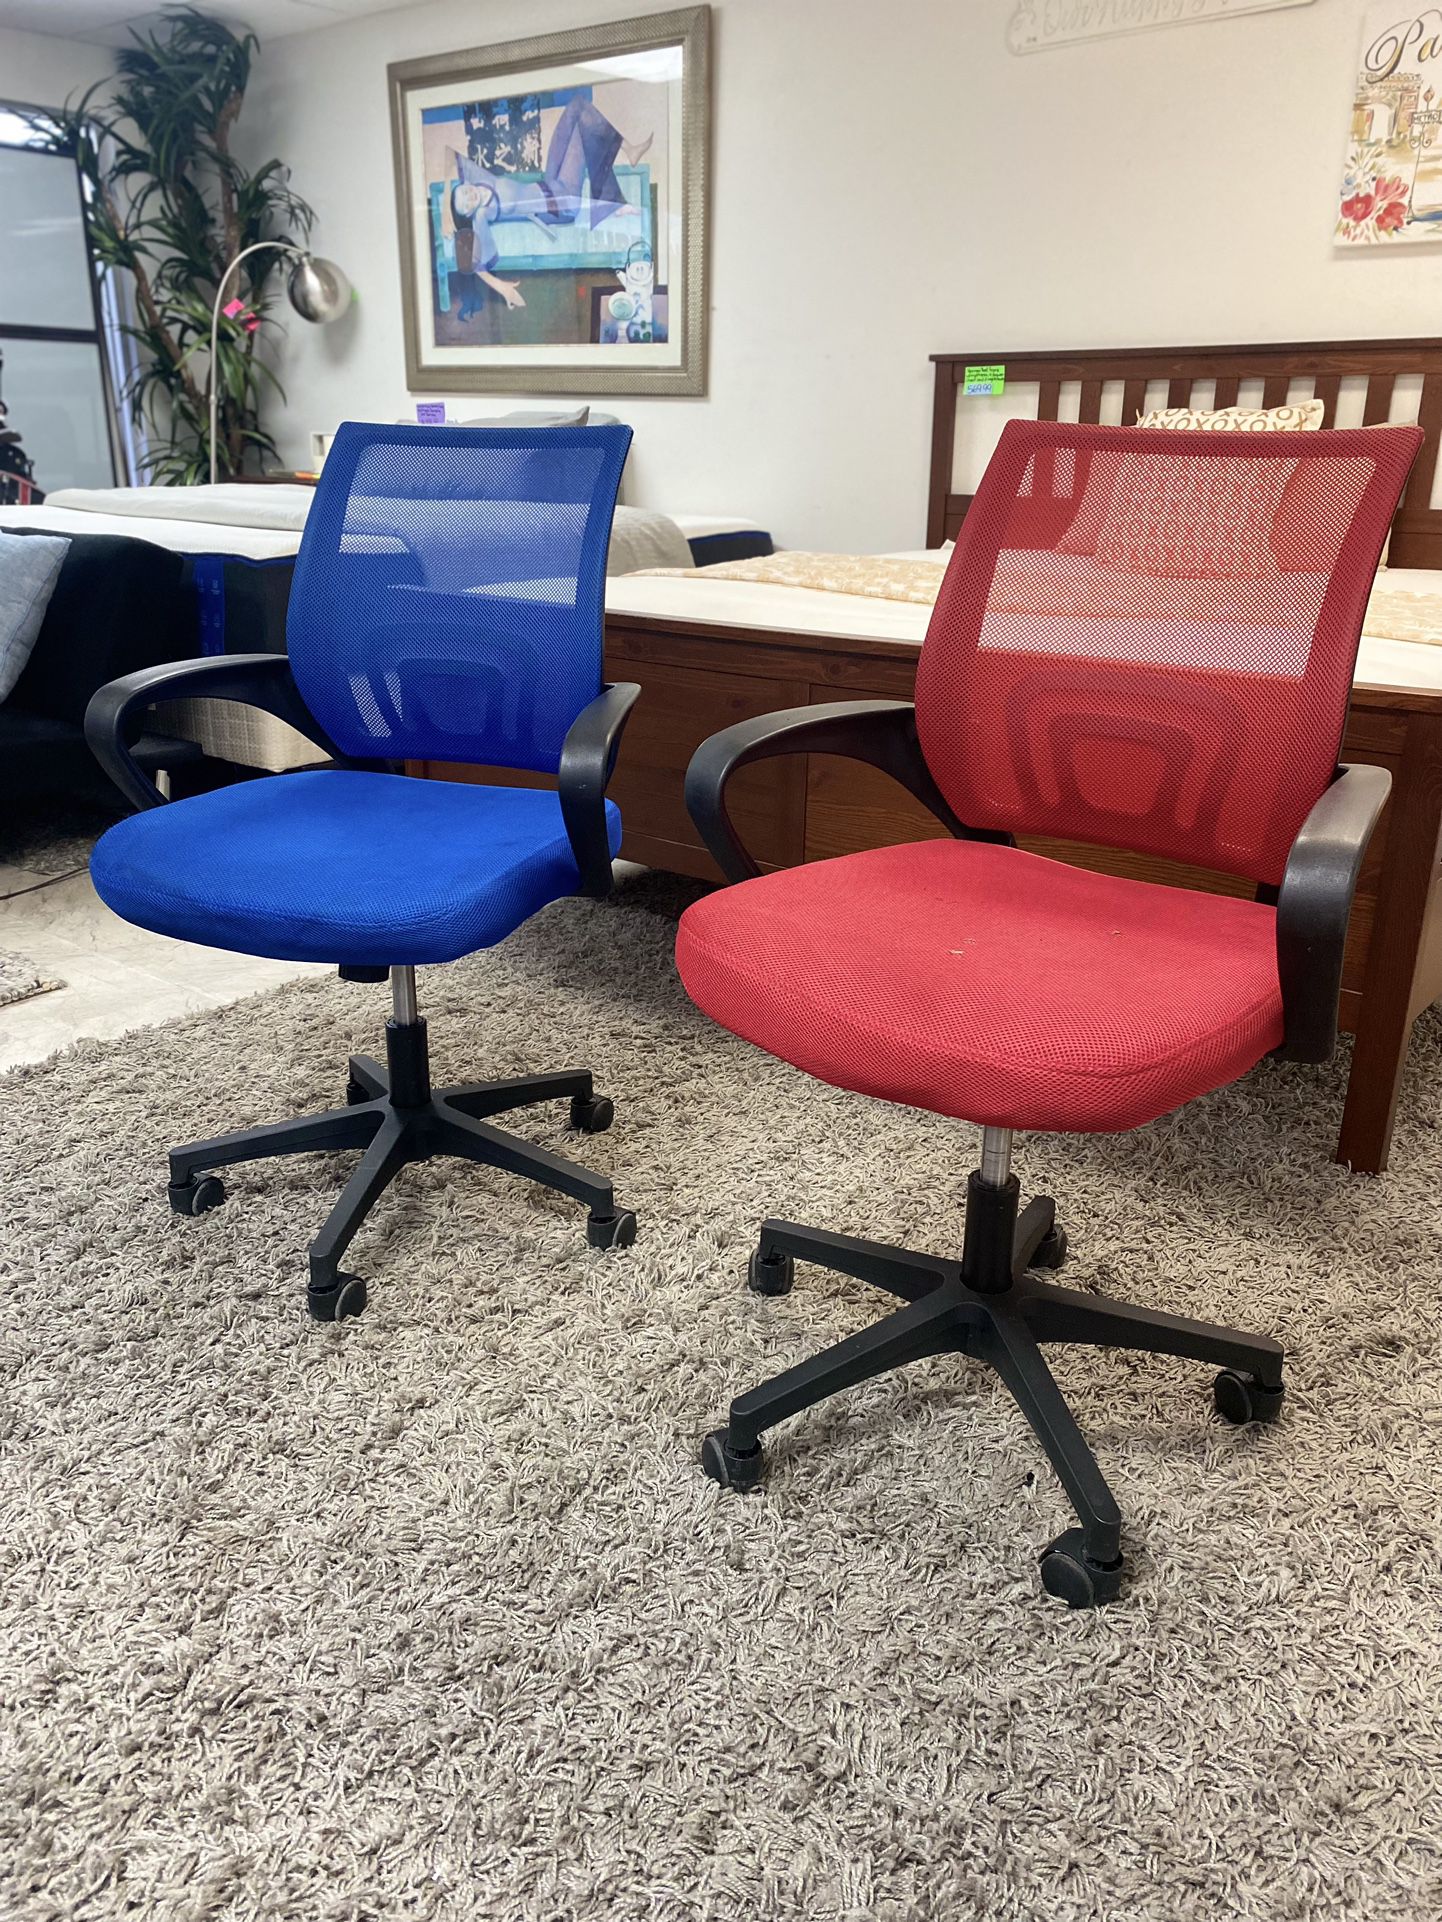 Adjustable Ergonomic Computer Chair Office Chairs $19.99 each 